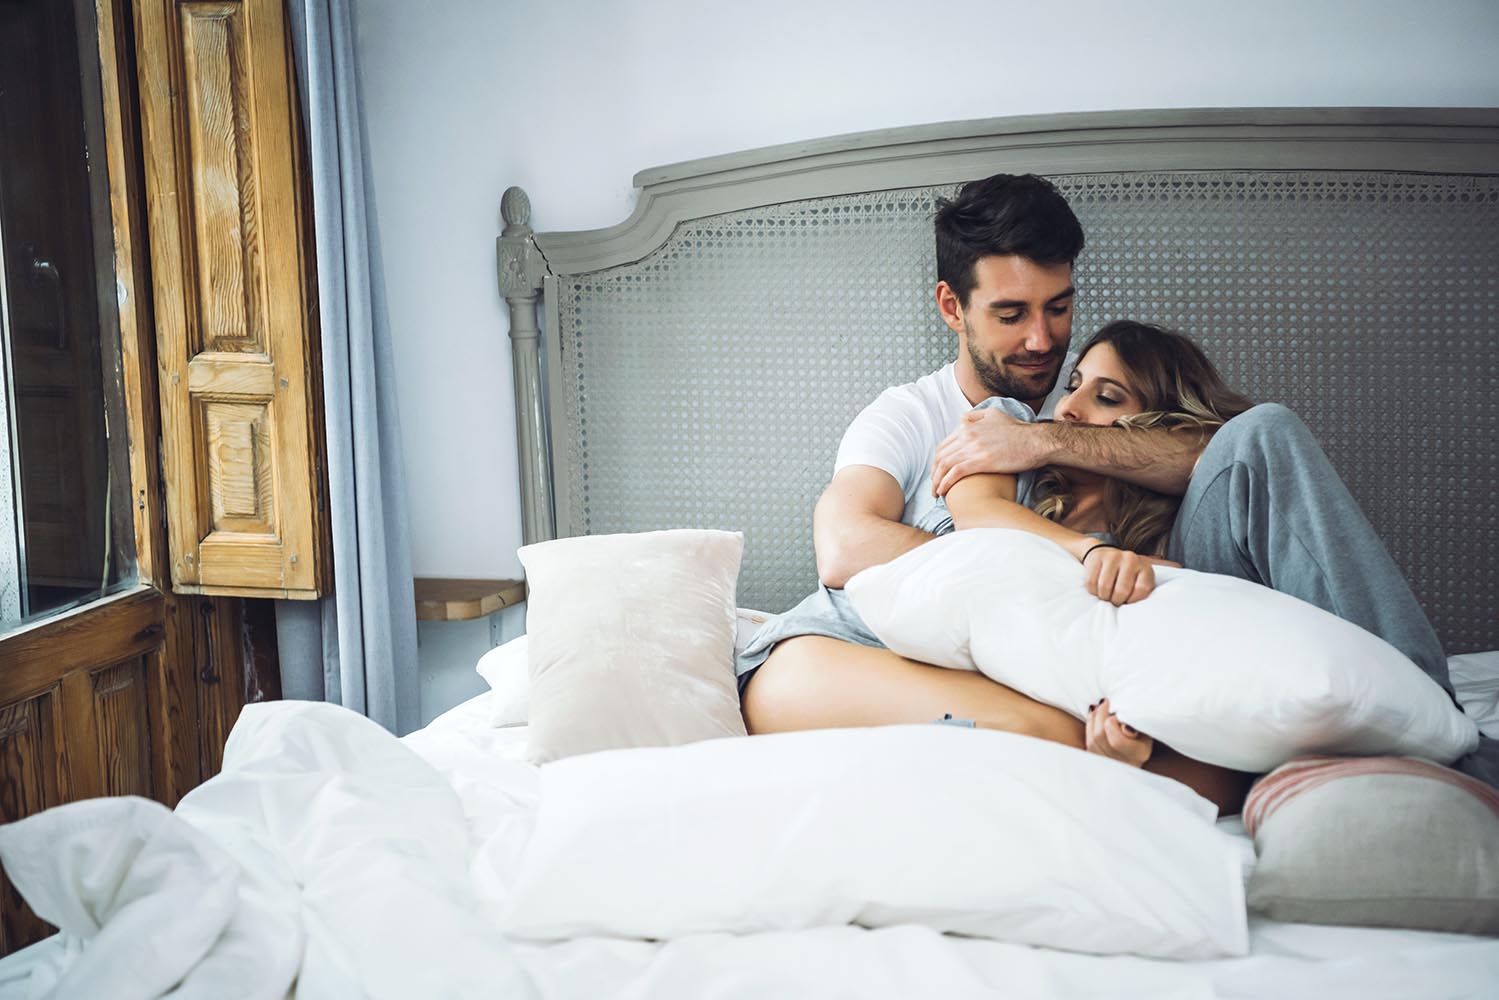 Cheerful couple embracing in bed